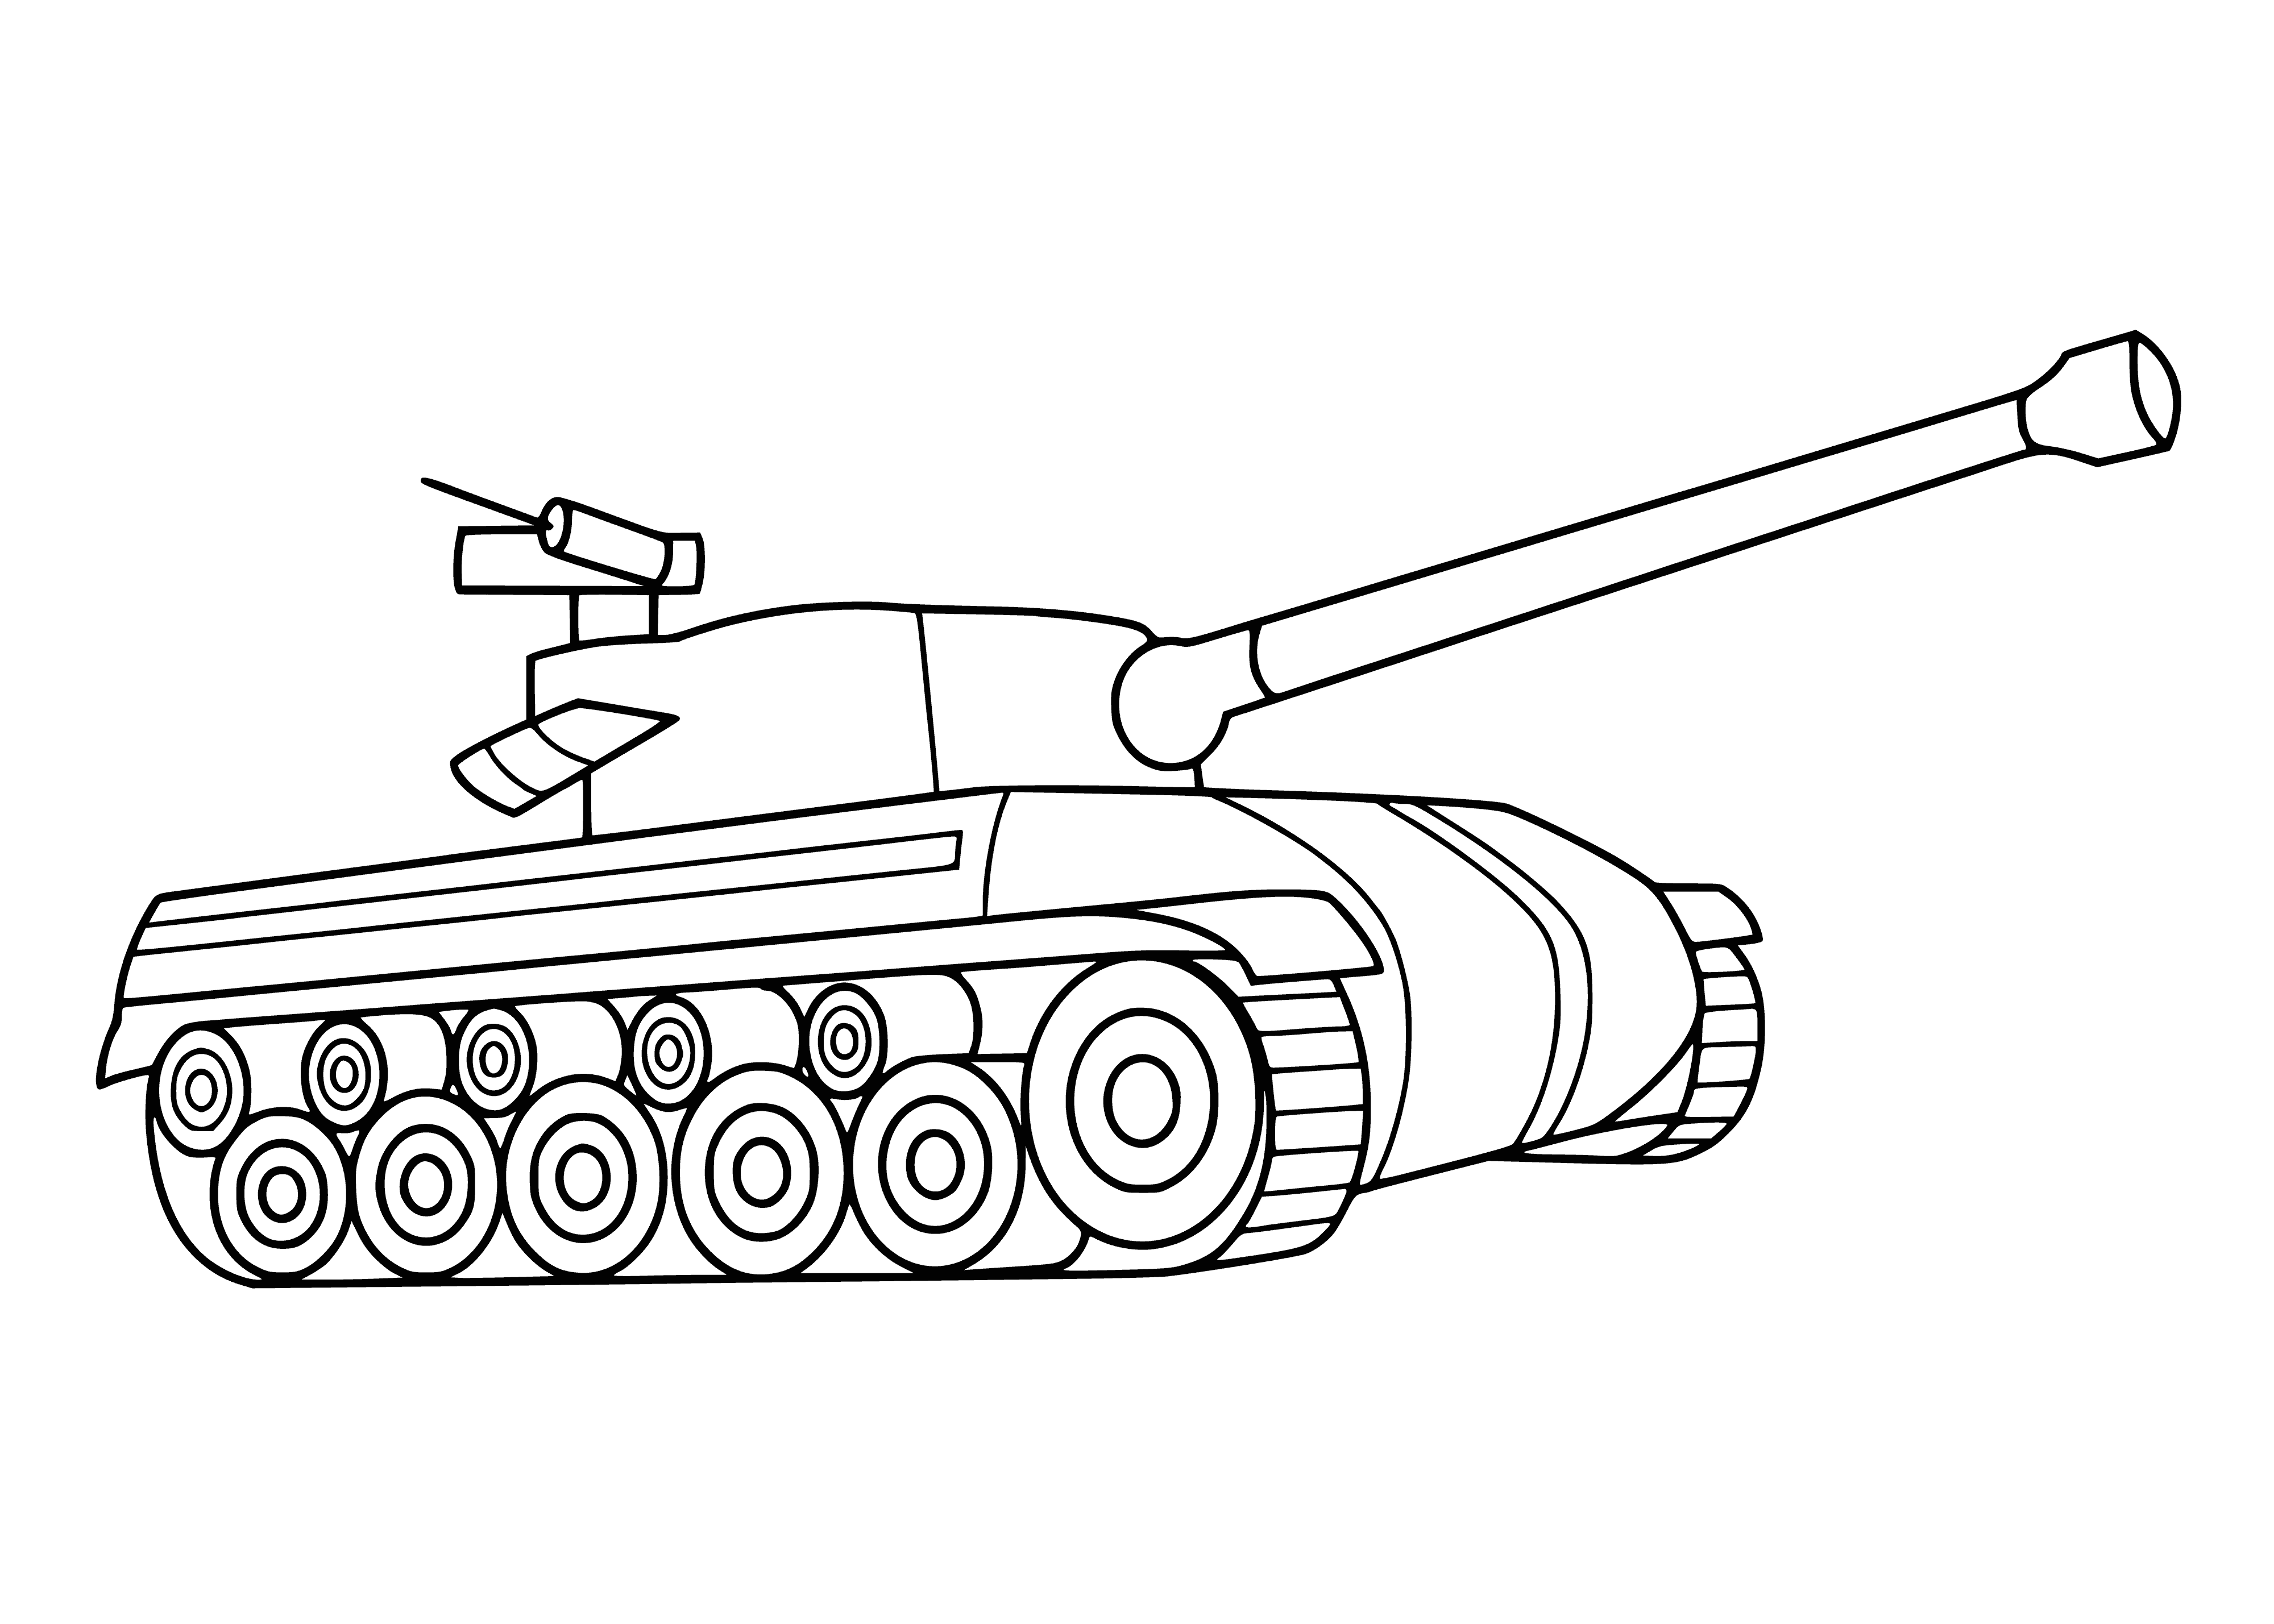 coloring page: Green tank w/camouflage markings, turret & treads. Soldier standing beside it.